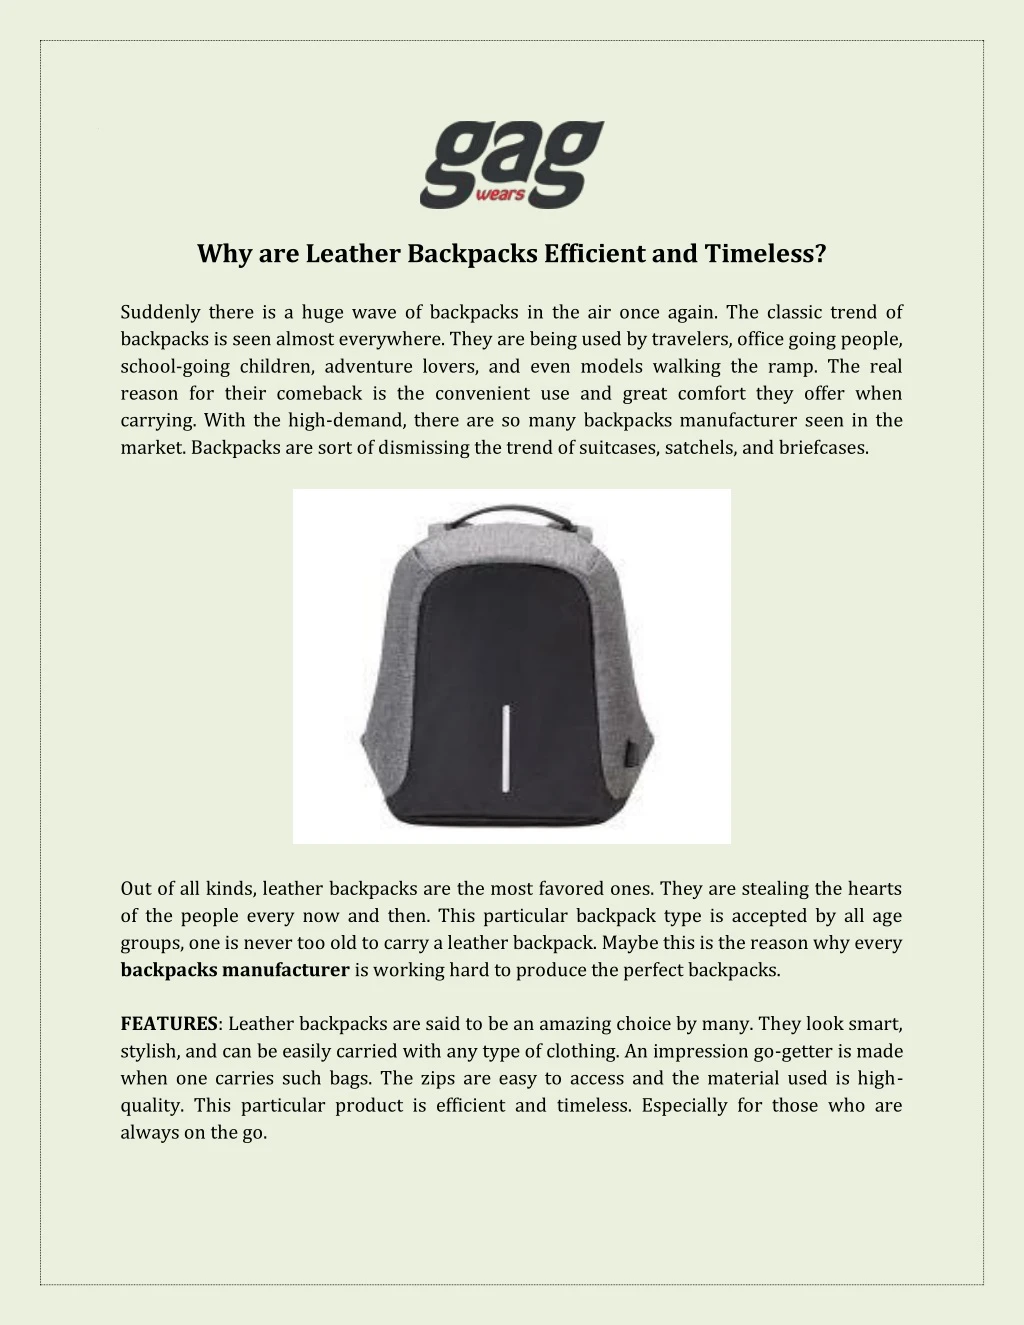 why are leather backpacks efficient and timeless